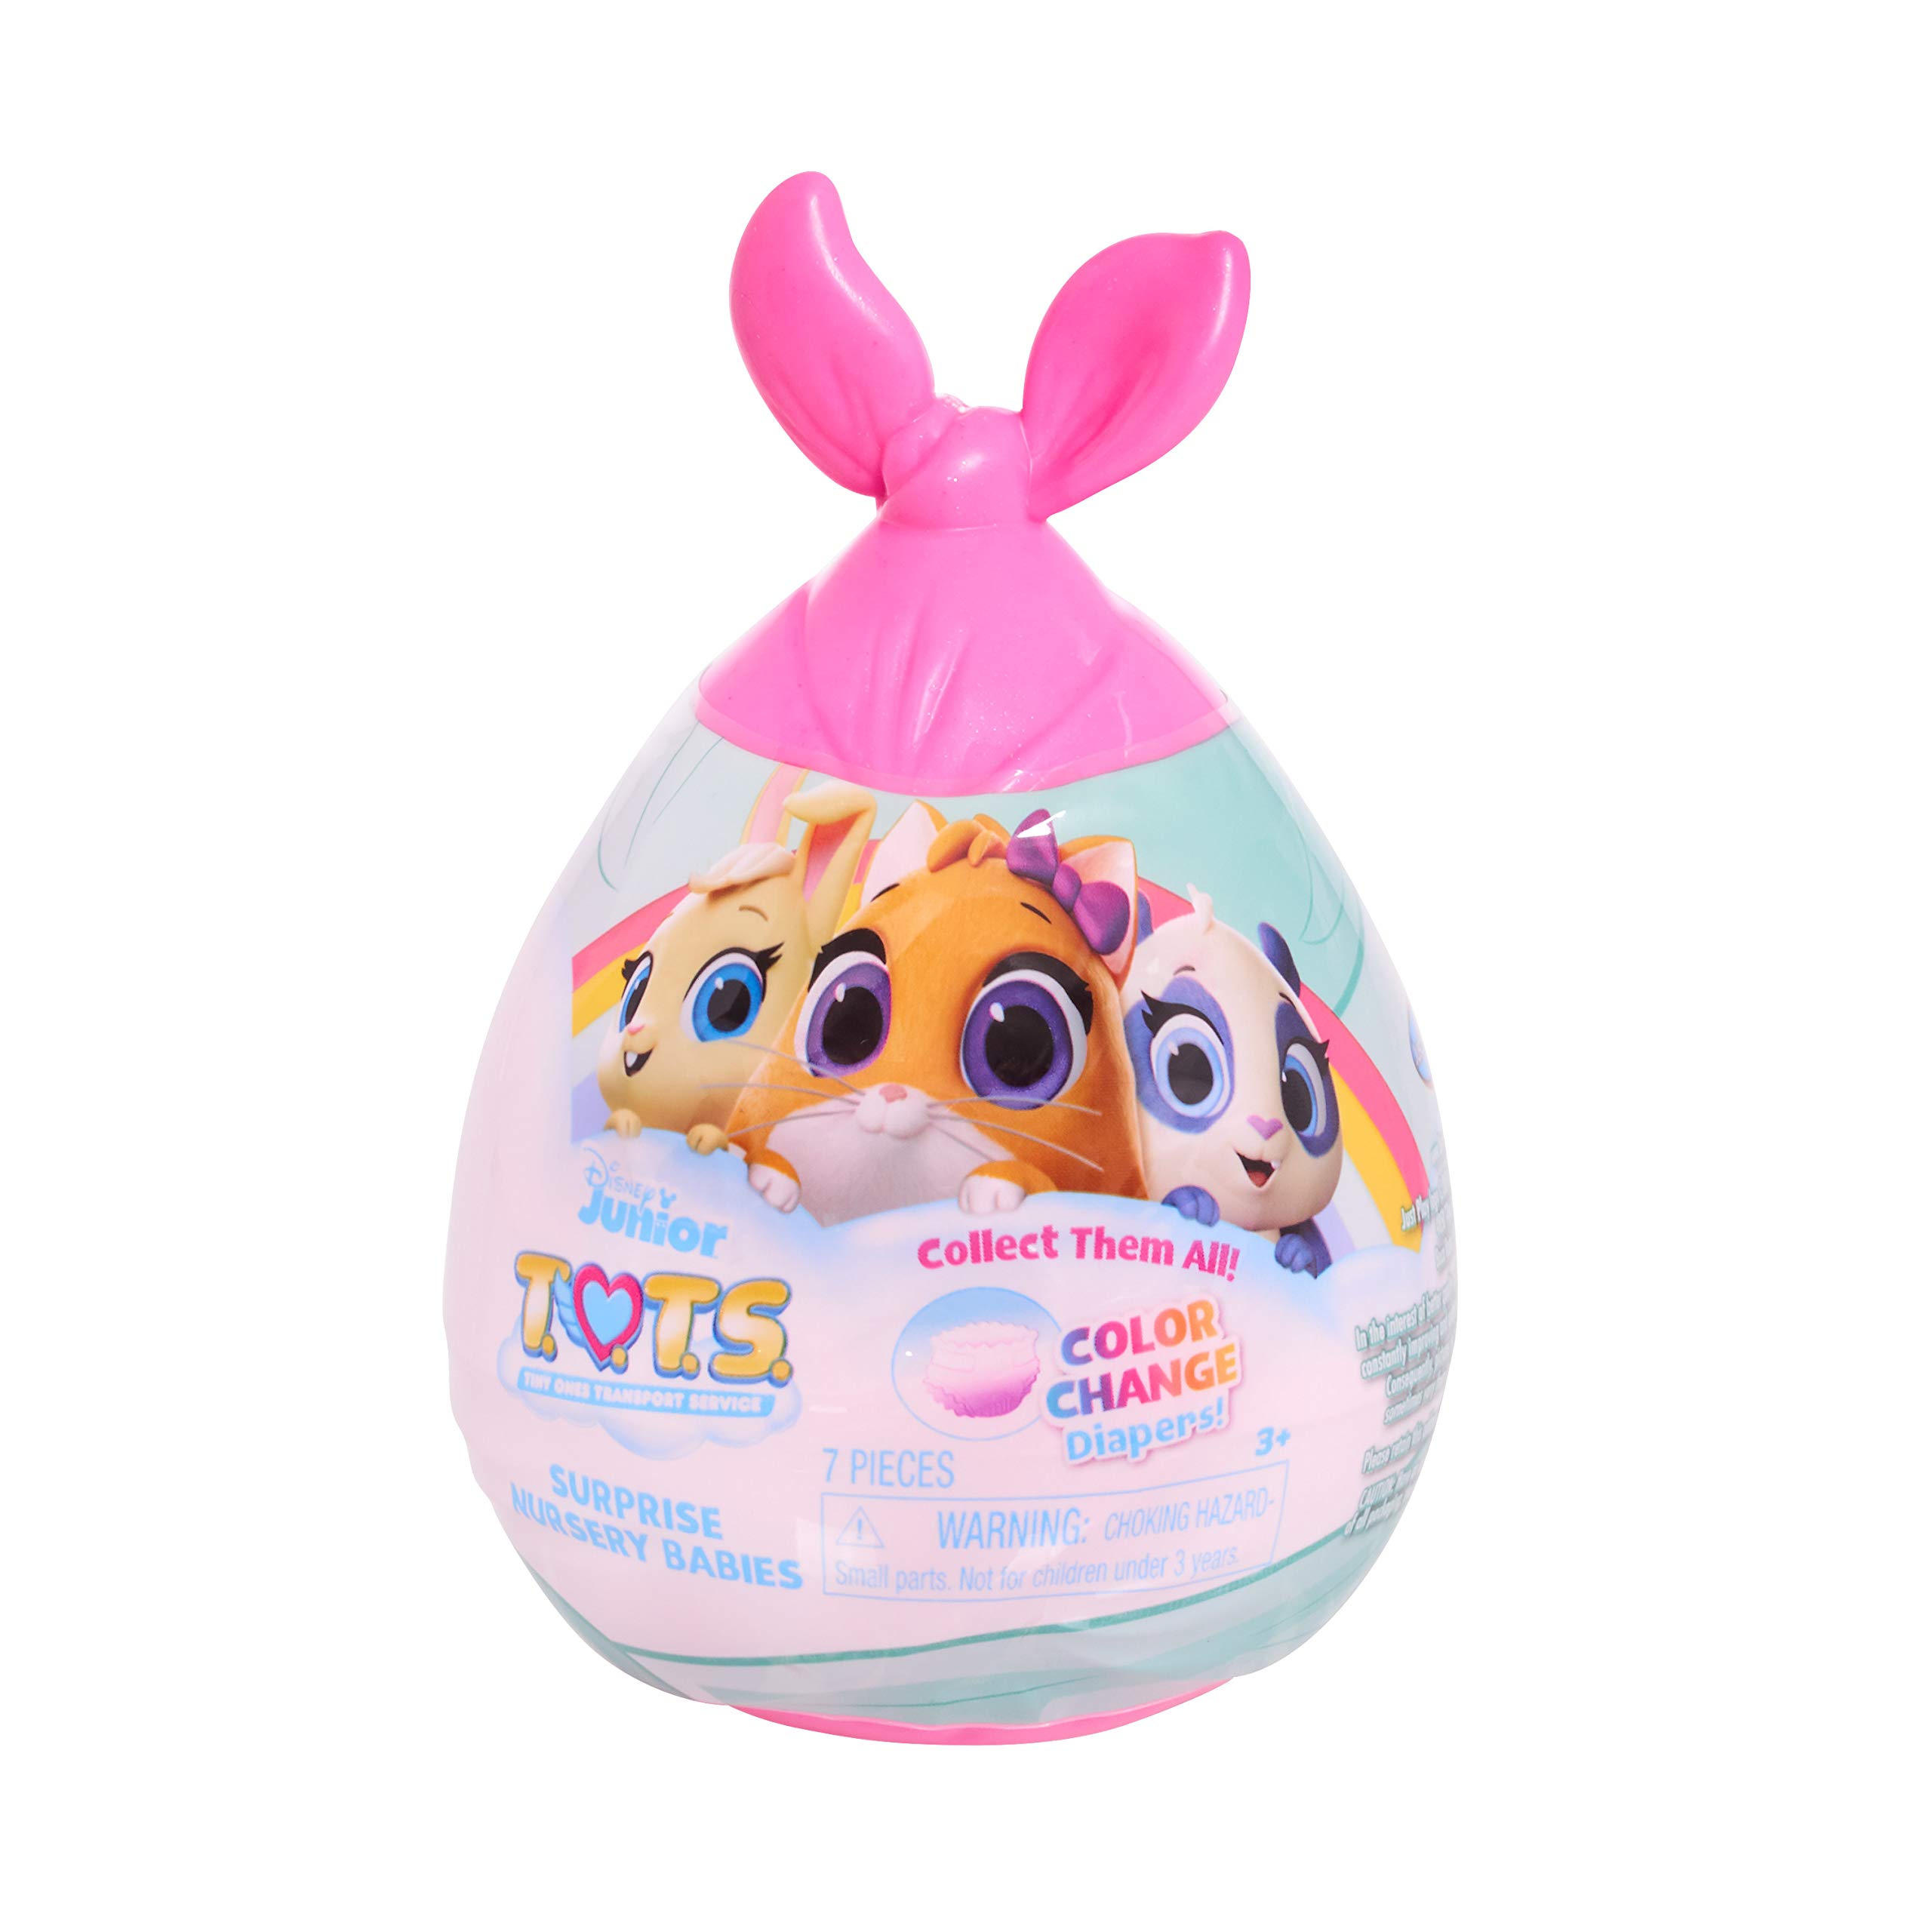 Disney Jr T.O.T.S. Surprise Nursery Babies, Series 2, Officially Licensed Kids Toys for Ages 3 Up by Just Play